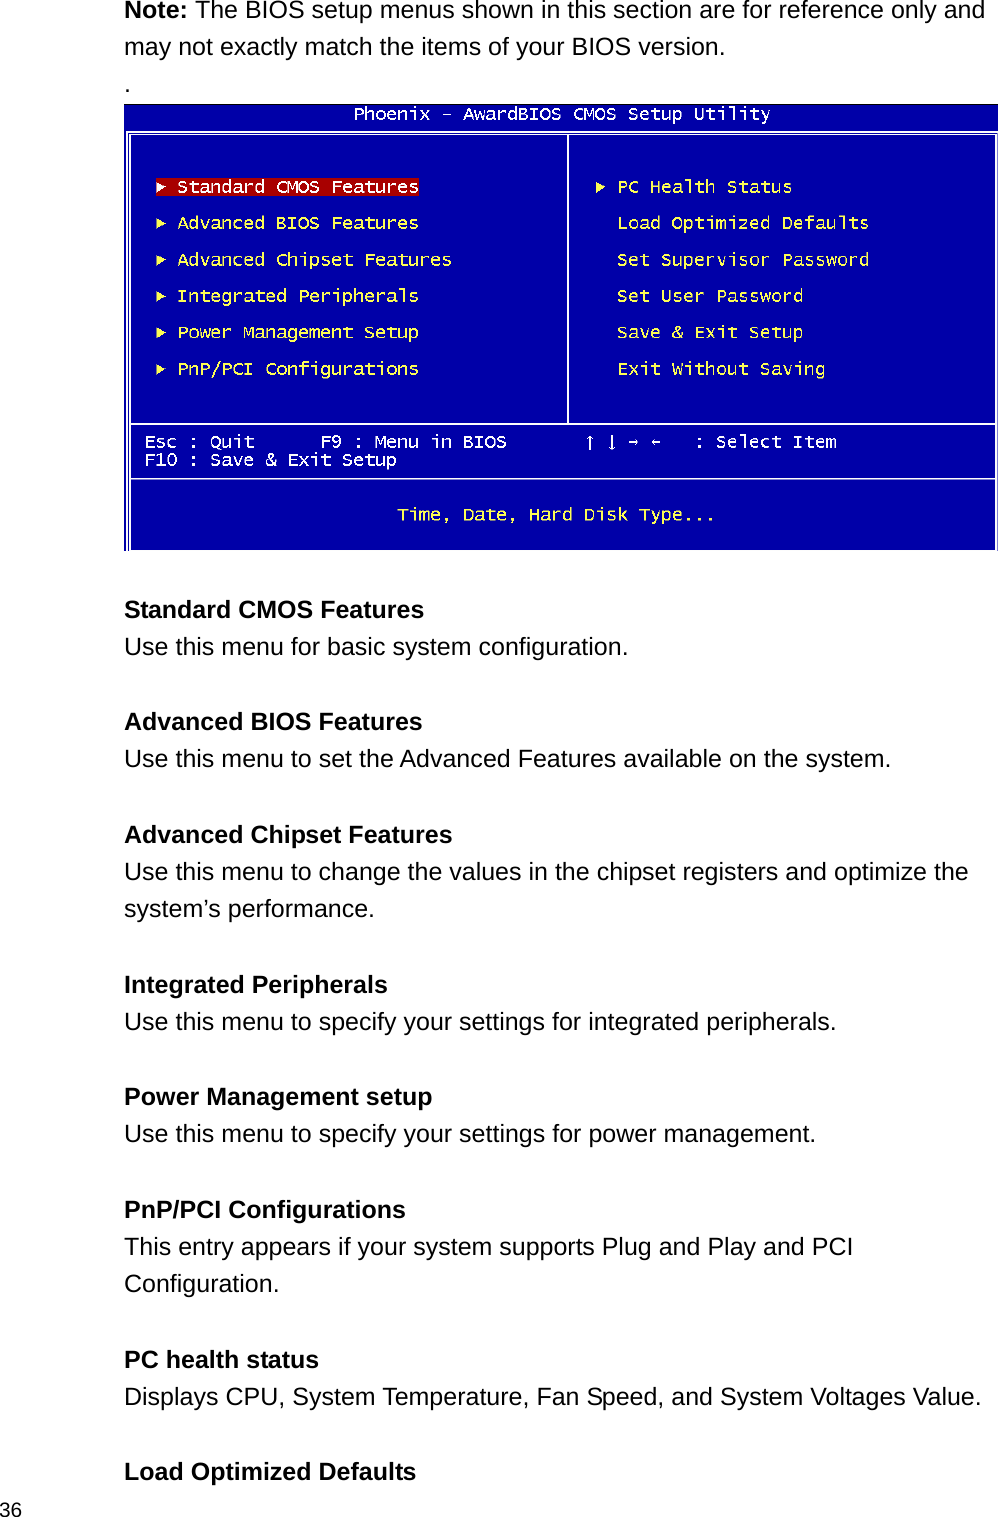  36 Note: The BIOS setup menus shown in this section are for reference only and may not exactly match the items of your BIOS version. .  Standard CMOS Features Use this menu for basic system configuration.  Advanced BIOS Features Use this menu to set the Advanced Features available on the system.  Advanced Chipset Features Use this menu to change the values in the chipset registers and optimize the system’s performance.  Integrated Peripherals Use this menu to specify your settings for integrated peripherals.  Power Management setup Use this menu to specify your settings for power management.  PnP/PCI Configurations This entry appears if your system supports Plug and Play and PCI Configuration.  PC health status Displays CPU, System Temperature, Fan Speed, and System Voltages Value.  Load Optimized Defaults 